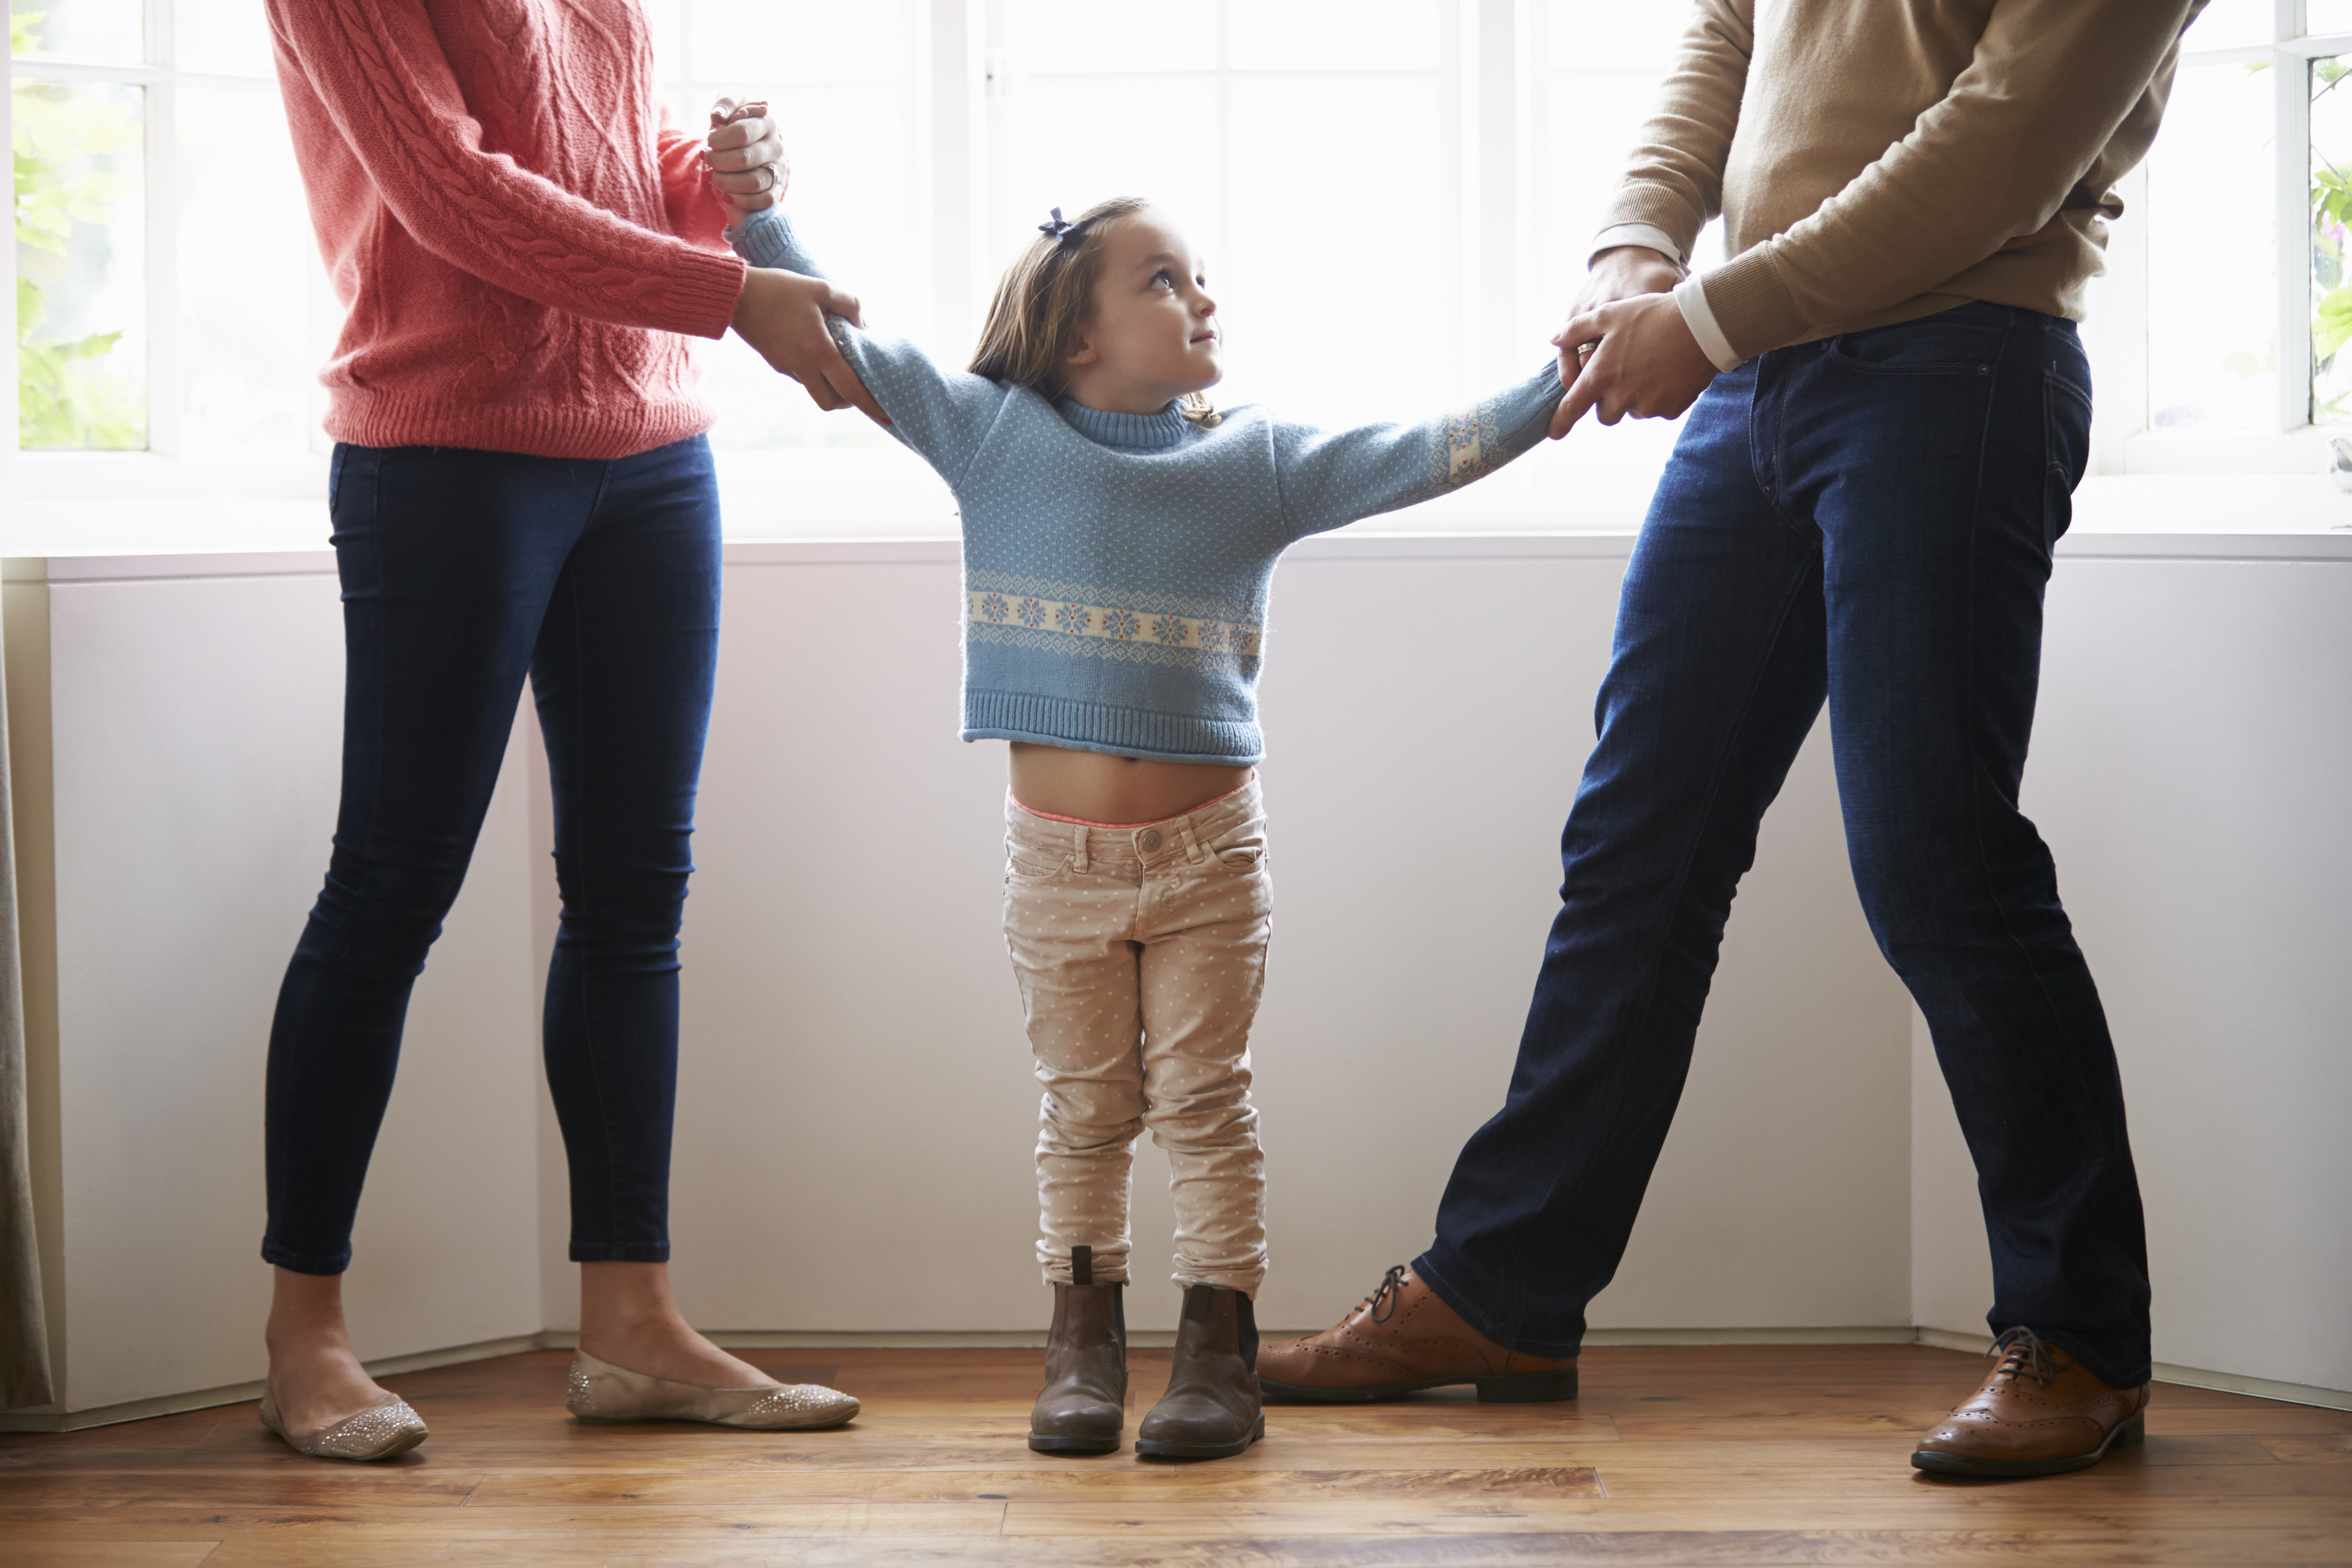 How Will Getting Divorced Affect My Kids?